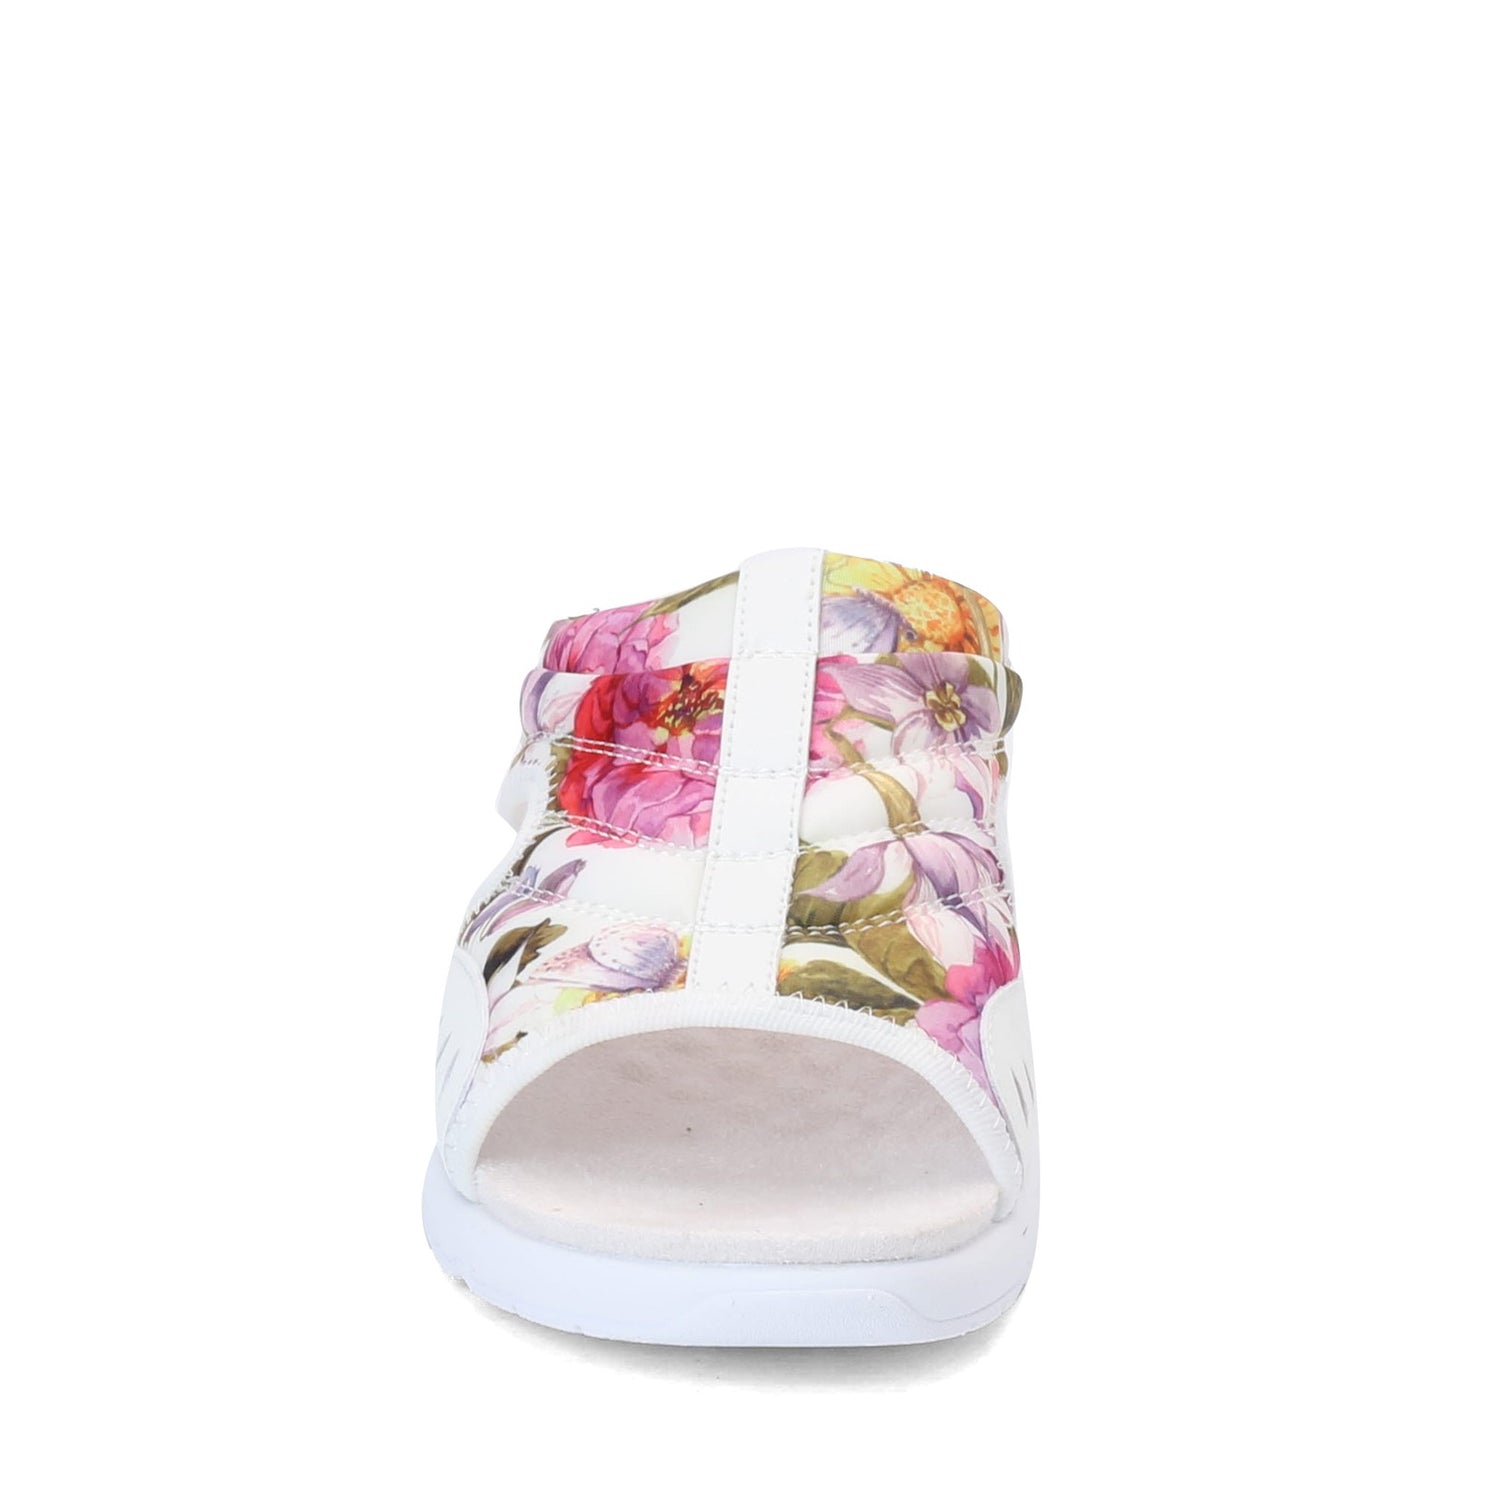 Peltz Shoes  Women's Easy Spirit Traciee Sandal WHITE FLORAL TRACIEE2-WHI07